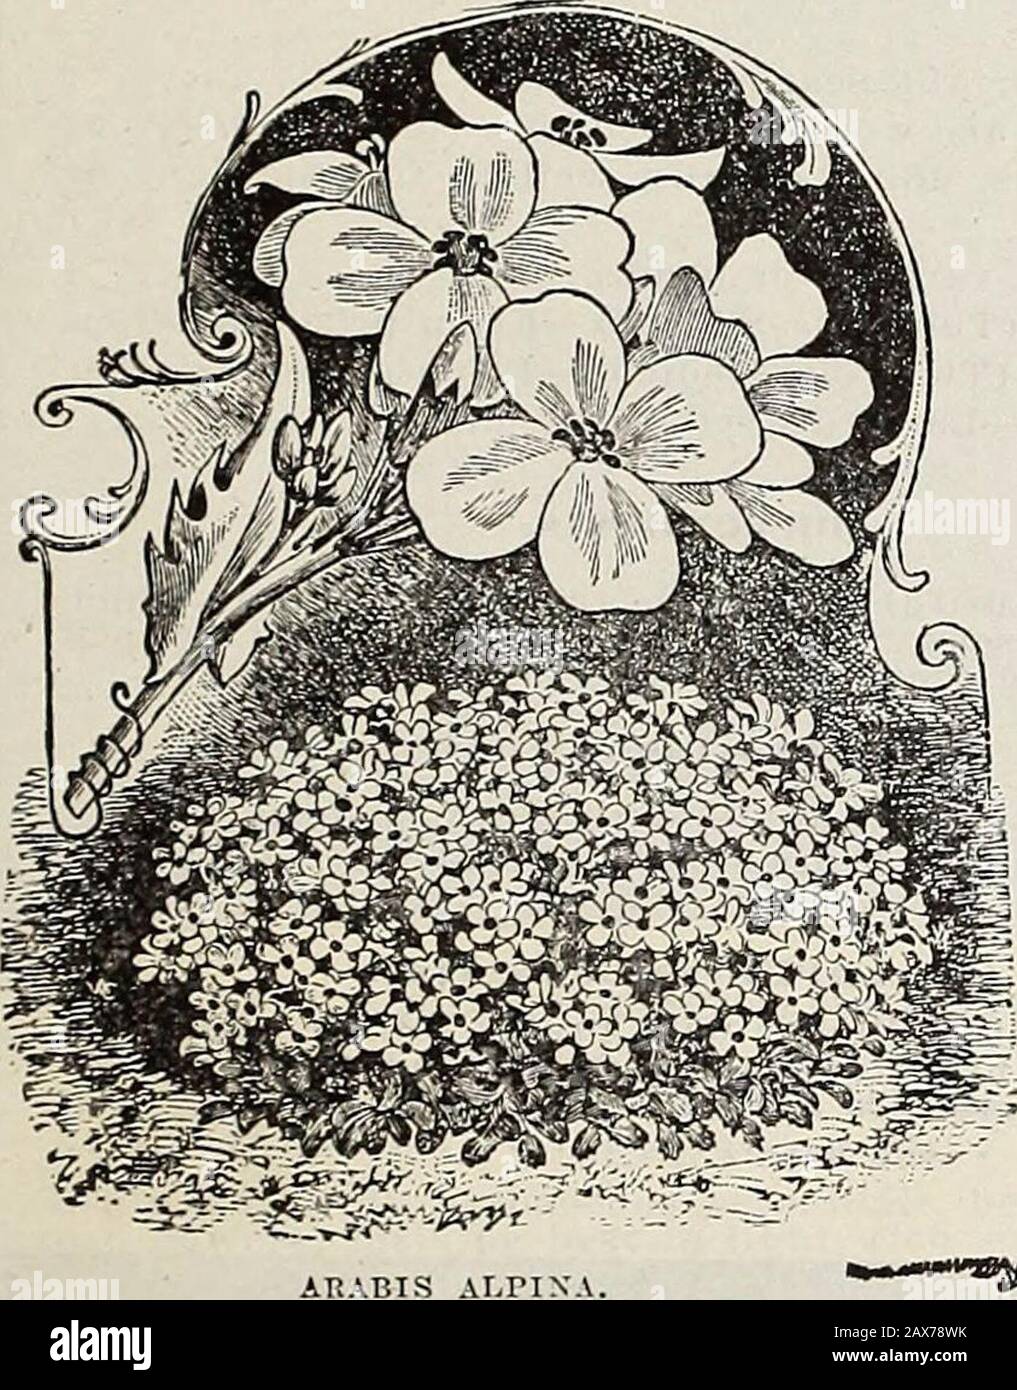 Currie's farm and garden annual : spring 1915 . erulea—Fine porcelain blue, center petals white 5 Glanriulosu (True)—Blue and white, 1 y2 feet 10 Hnyiodgensis Delieatissimn—A new long-spurred hybrid. Color delicate light yellow; spurs satiny-rose 15 Skinnerii—Scarlet and yellow, 1 % feet 10 Stuartii—Splendid large flower, handsome pale blue - 10 Choice Mixed 5 ARABIS.Alpina—An early blooming plant, well suited for borders androck work. Pure white flowers; height 6 inches. H. P 5 AUBRIETIA (False Wall Cress). H. P. Graeca—Trailing, purple 10 Lclchtlinii Rosea—Rosy carmine 10 AURICULA. Of this b Stock Photo